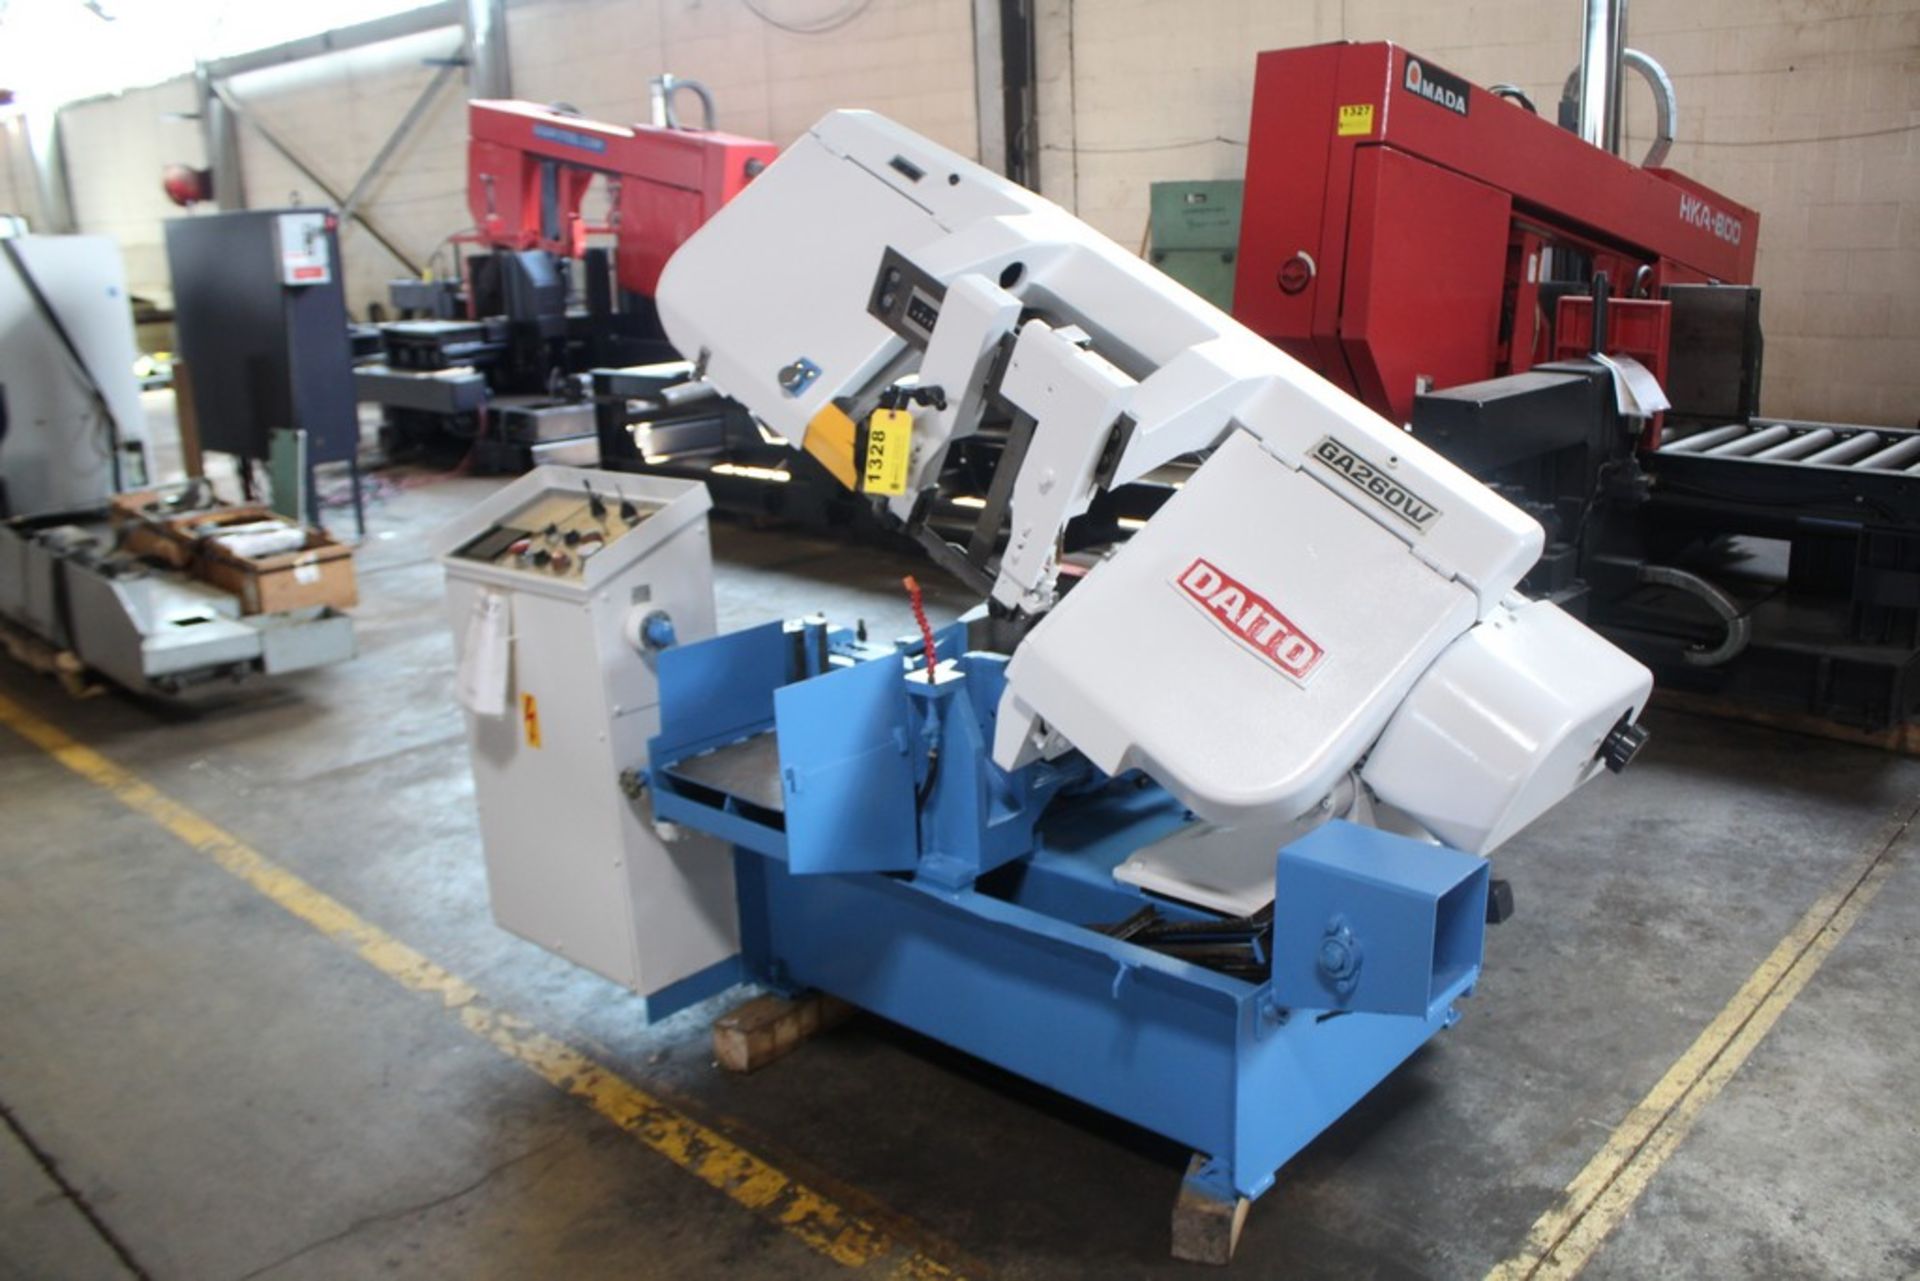 12" X 10" DAITO #GA260W HYDRAULIC FULLY AUTOMATIC HORIZONTAL BAND SAW, S/N 47KY80384 (1998) EQUIPPED